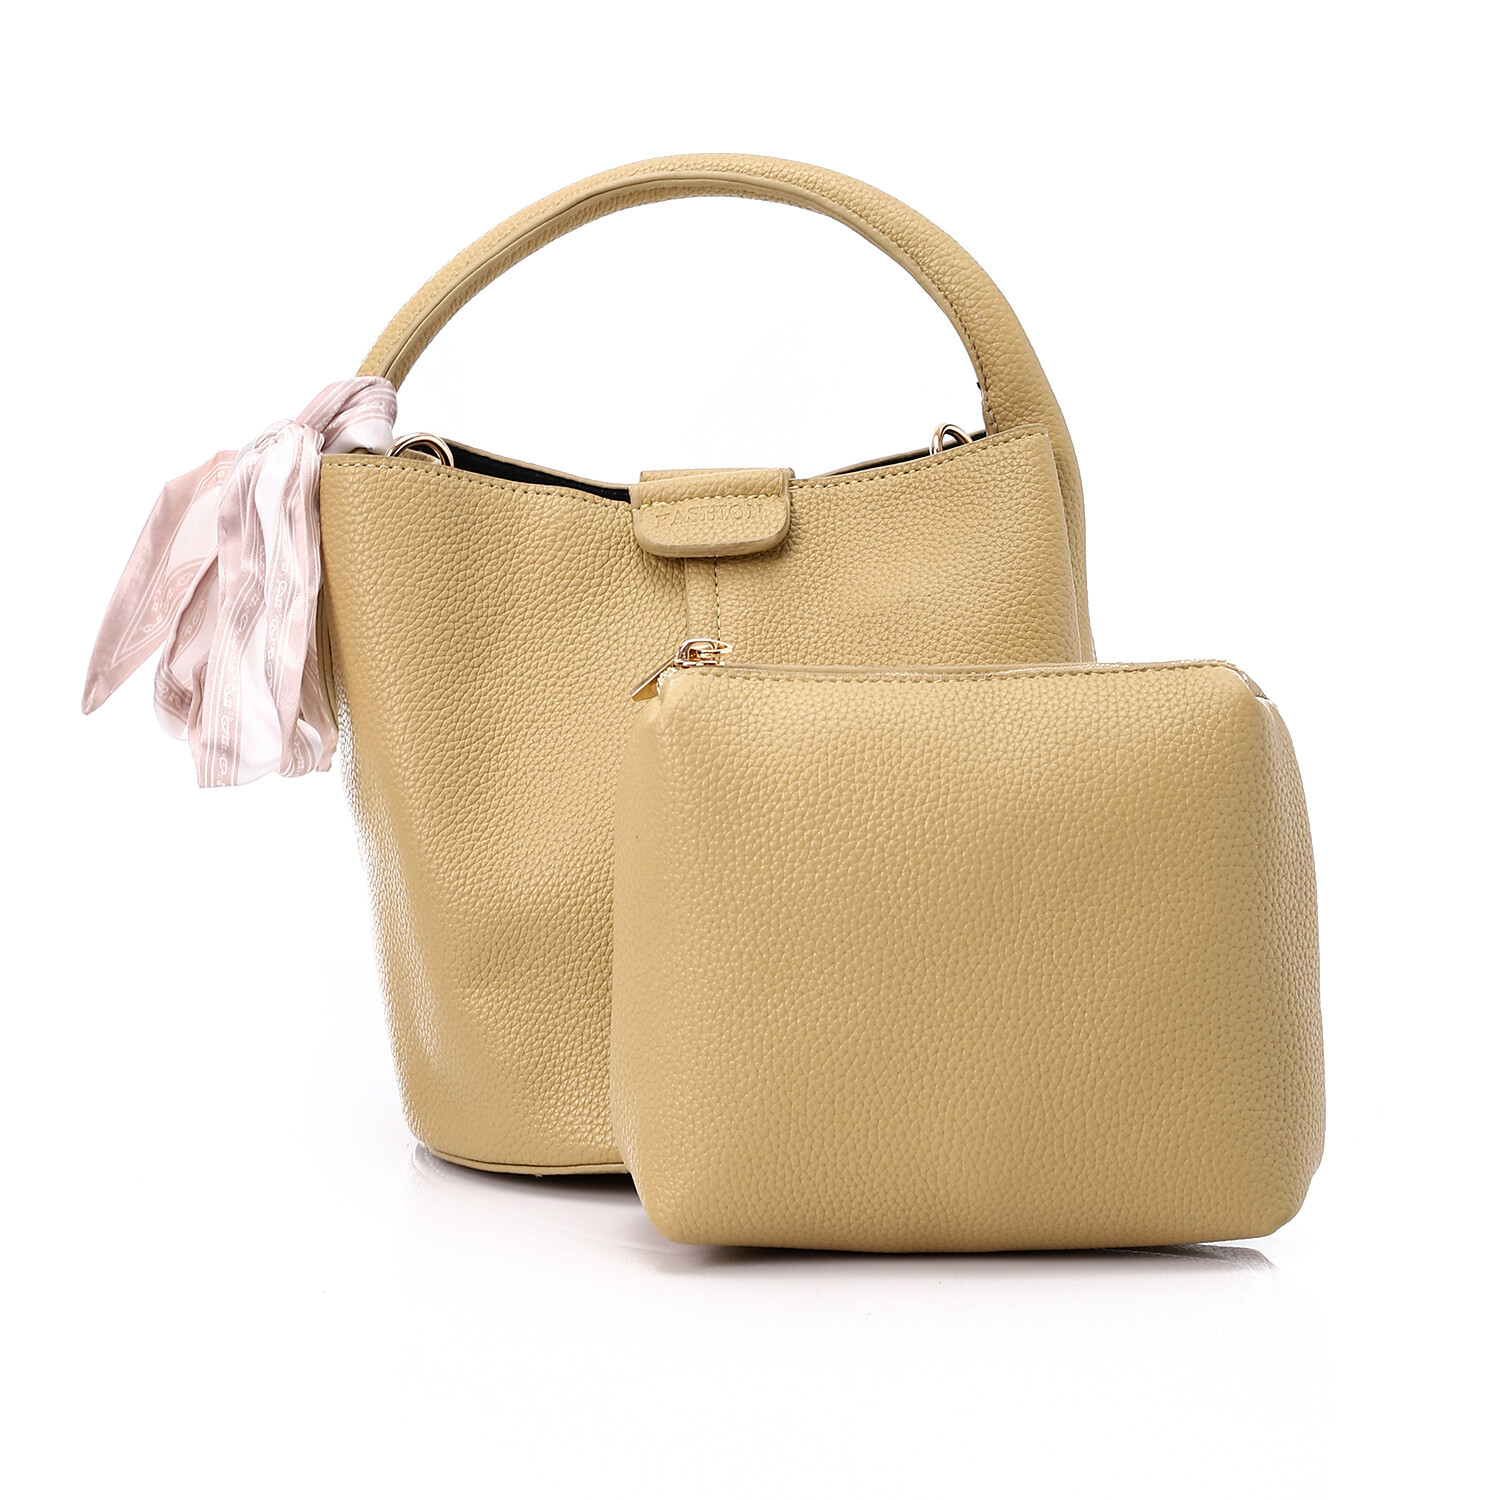 Decorative Bow Bucket Bag Comes With Pocket - Yellow 4998